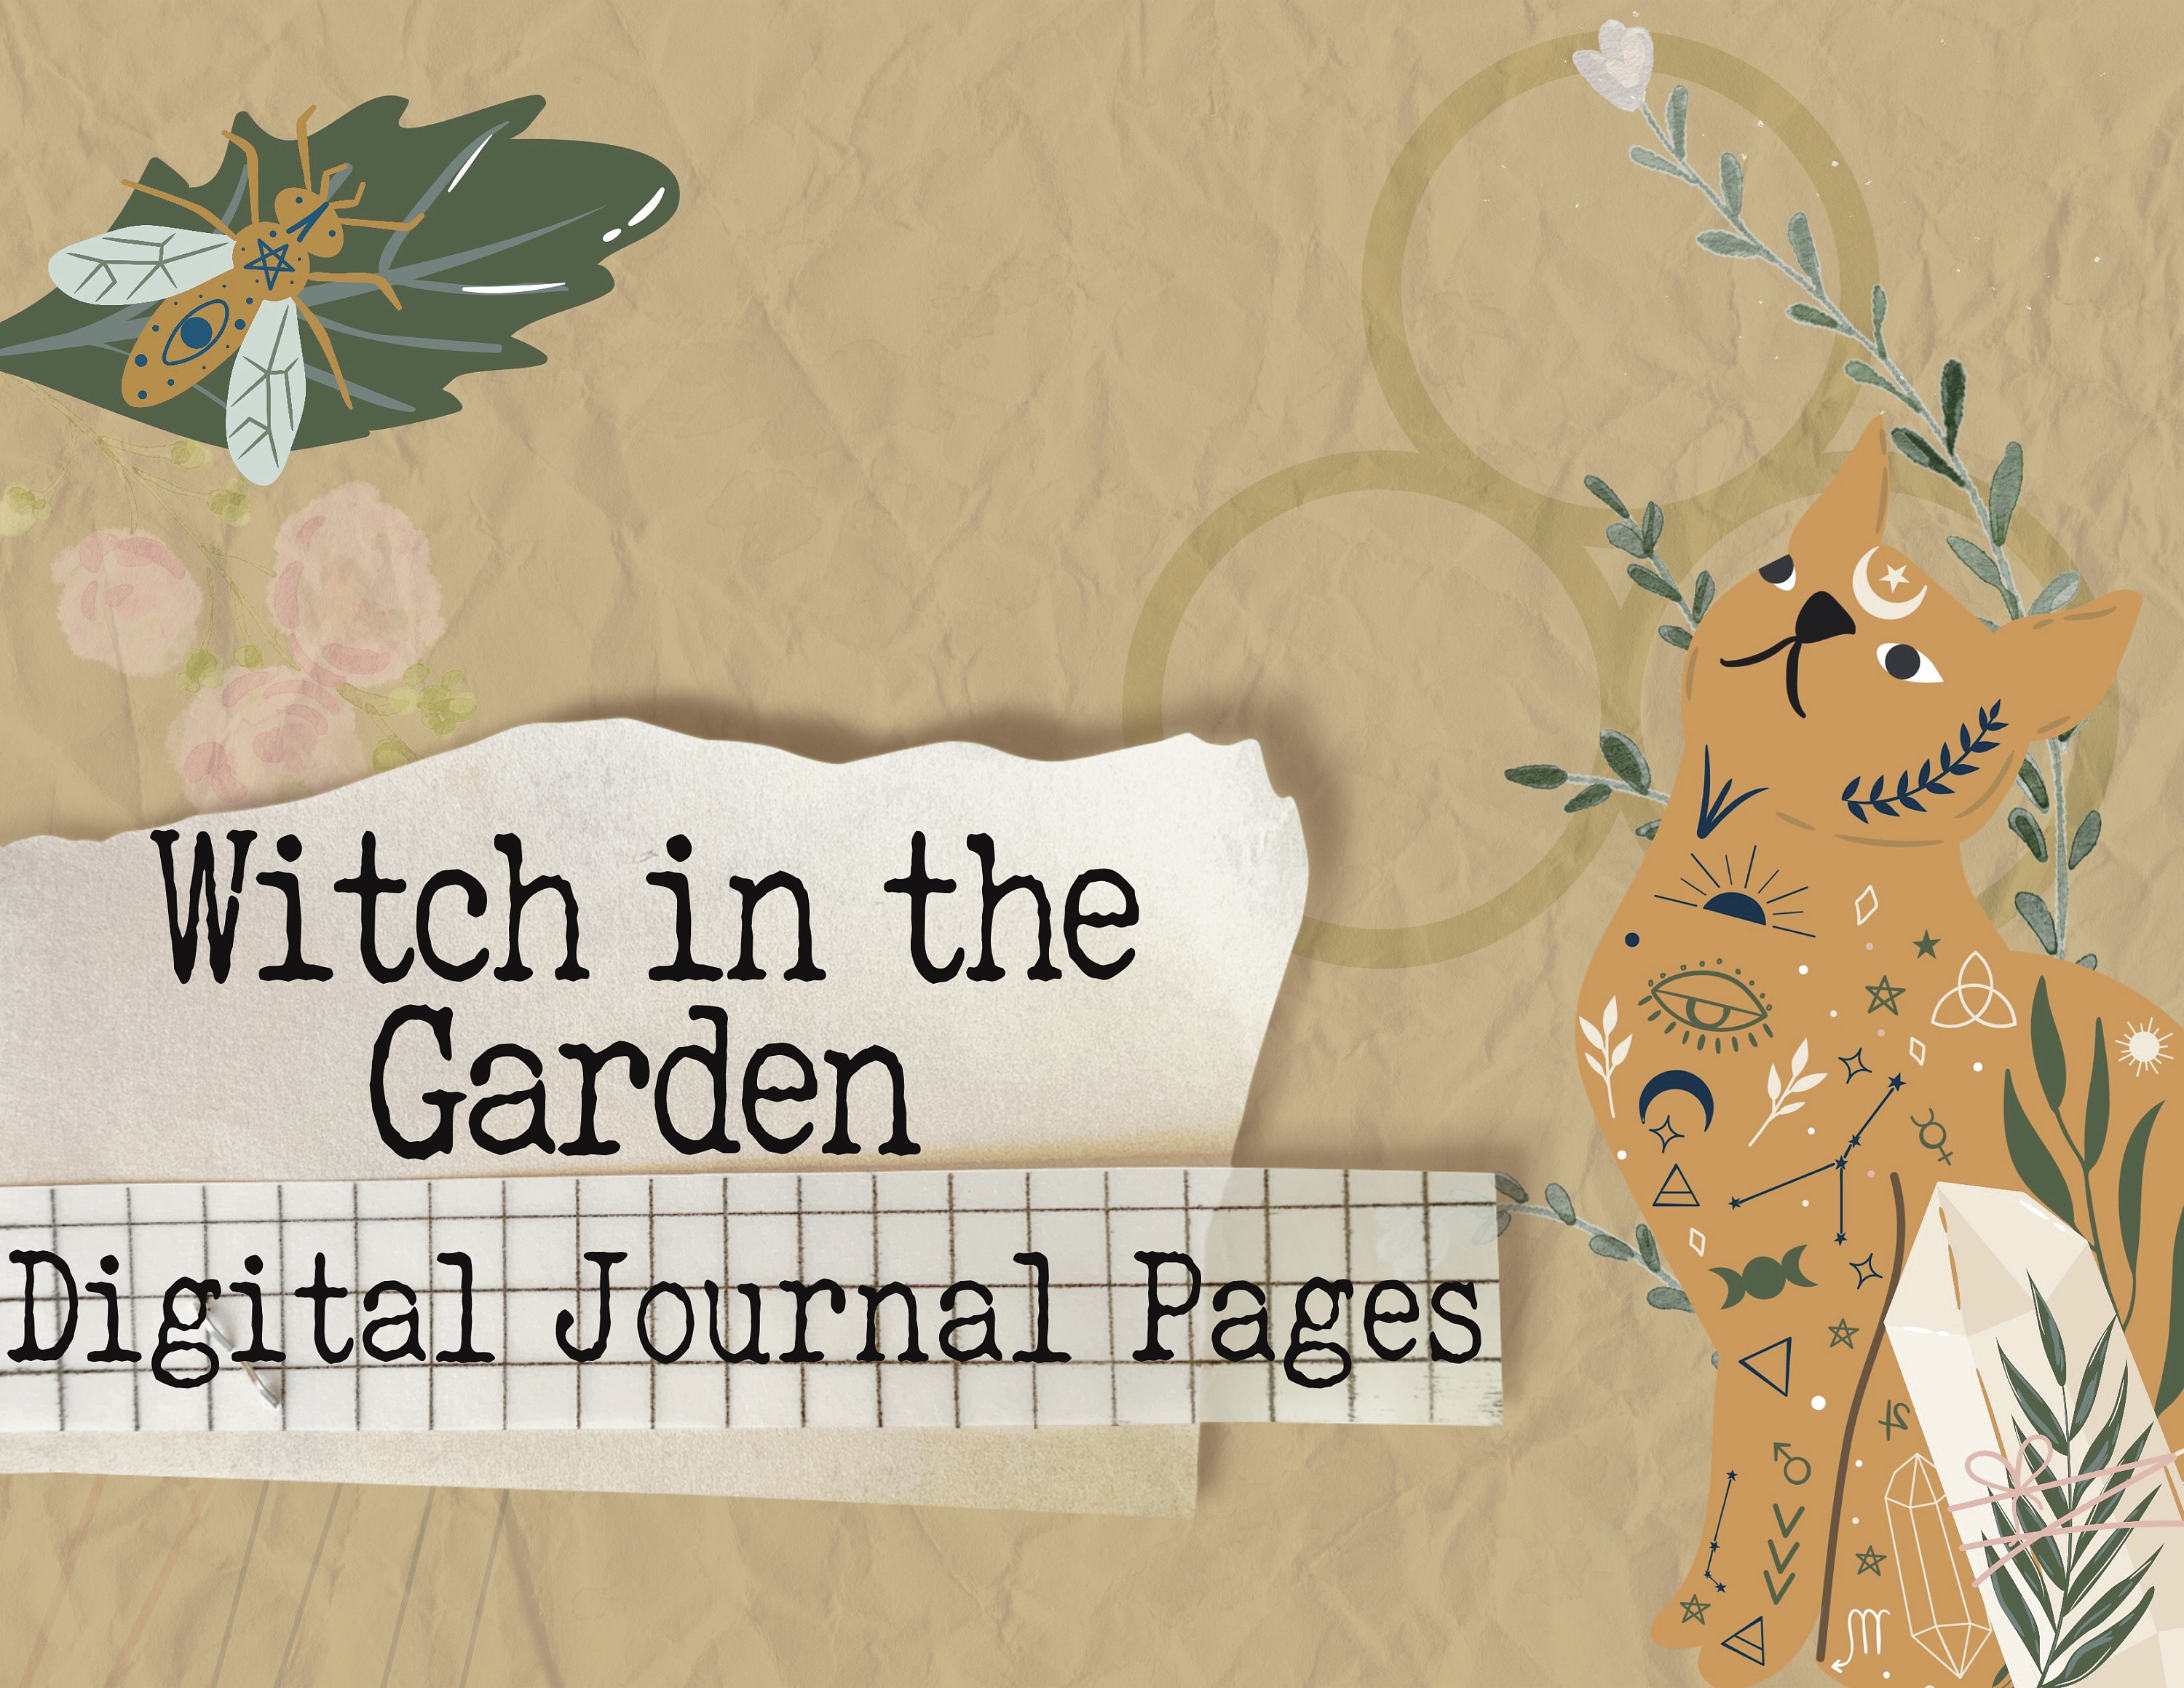 Green Witch Witchcraft Series: The Green Witch's Garden Journal